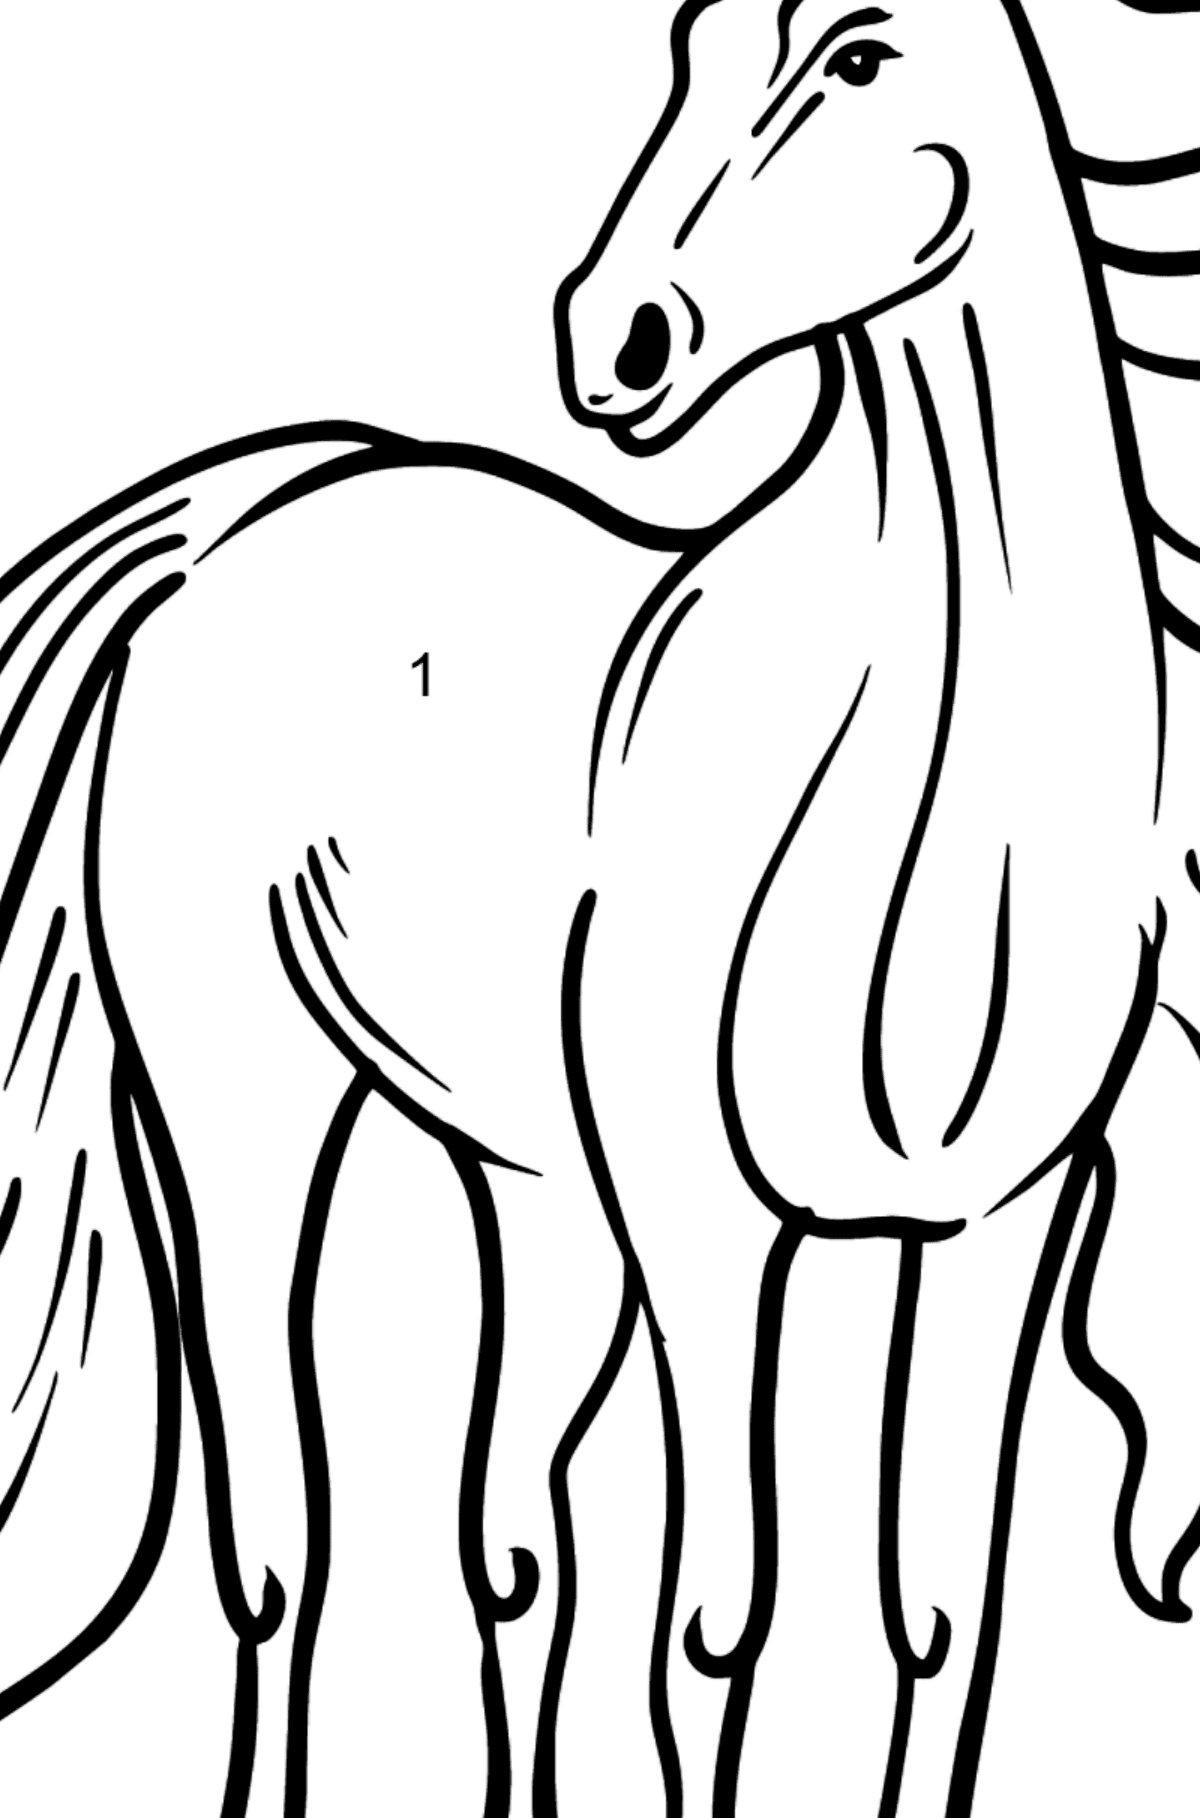 Horse coloring page - Coloring by Numbers for Kids